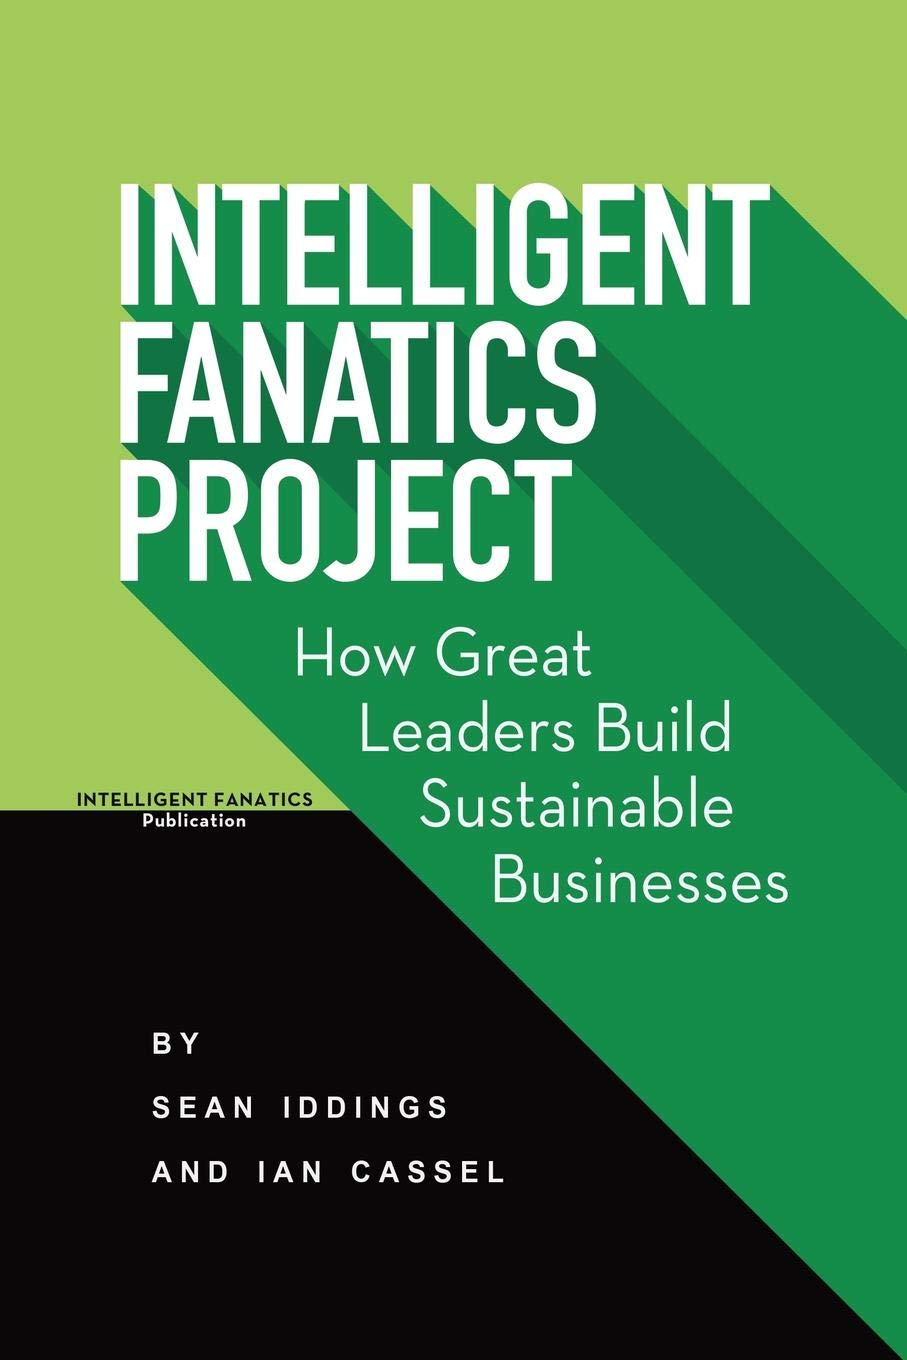 Intelligent Fanatics Project: How Great Leaders Build Sustainable Businesses